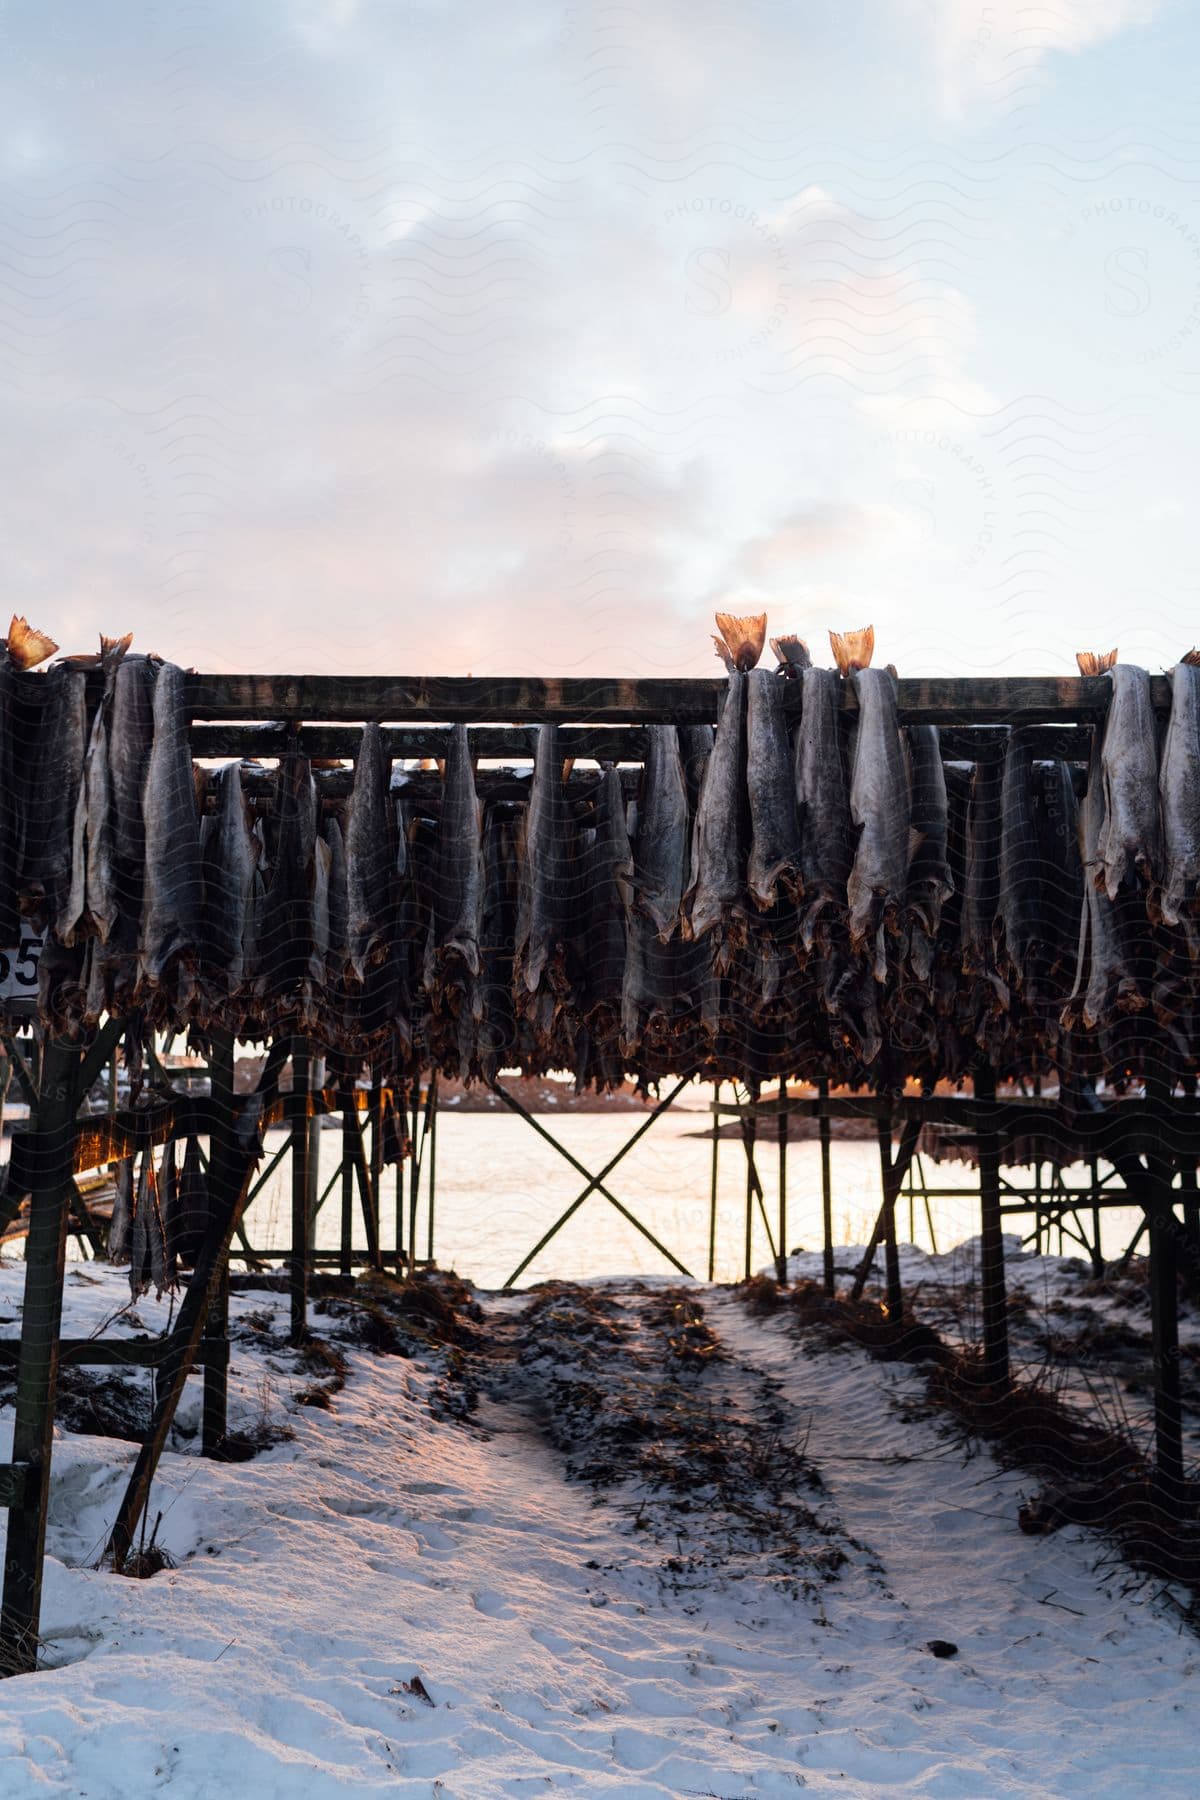 Dried fish are hanging outside in the snow on a cloudy day in a snowy region